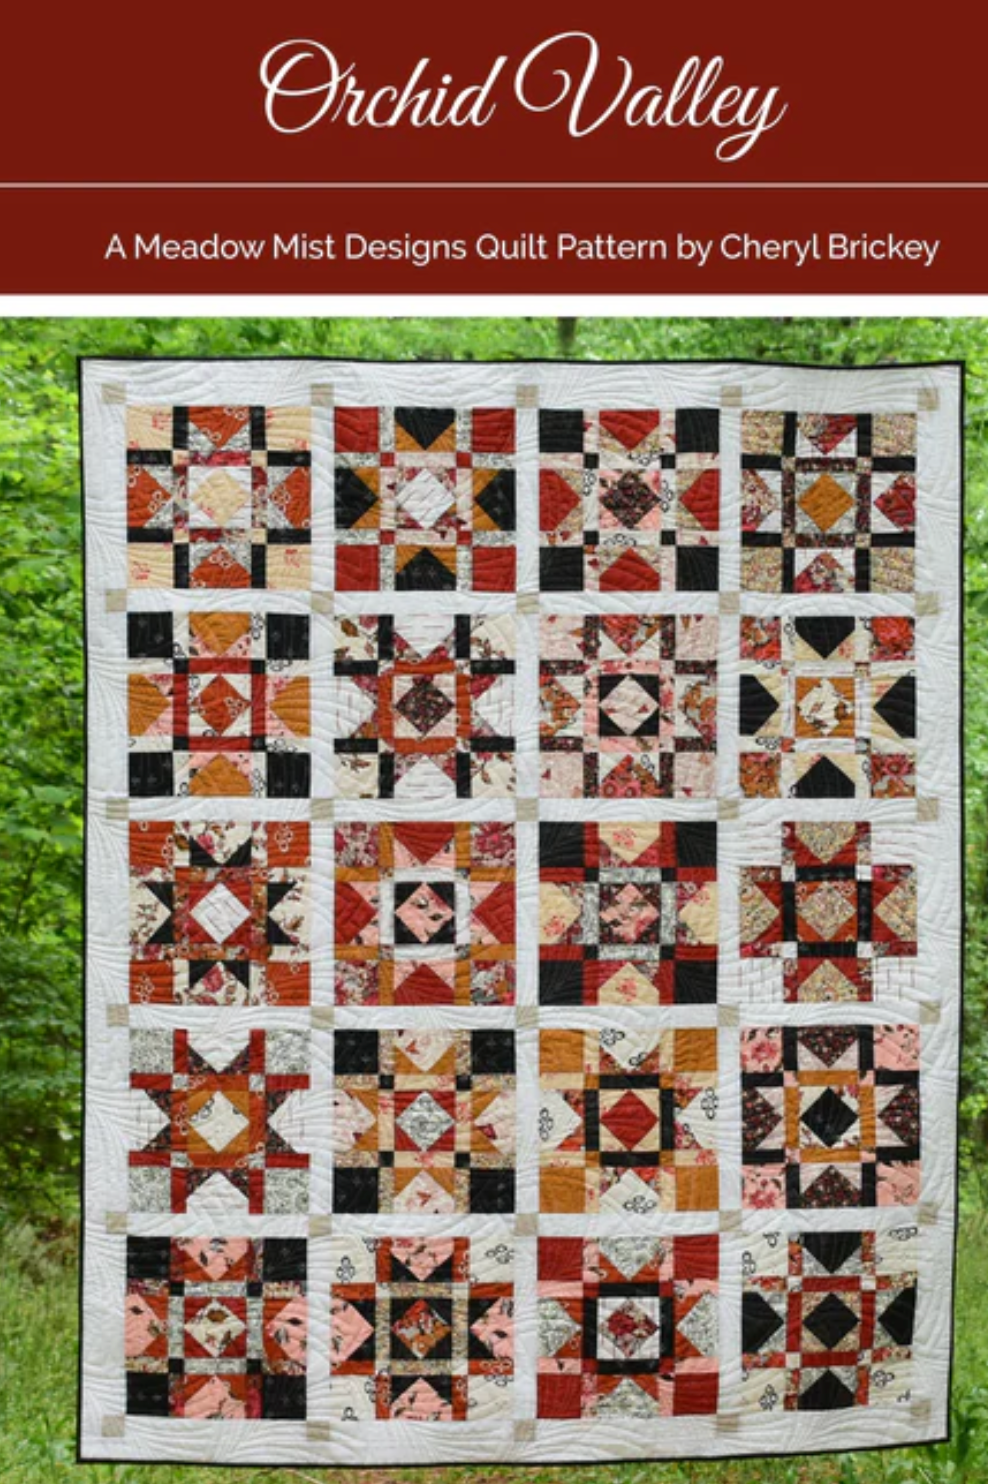 Birdie by Libs Elliot : Orchard Valley Quilt Kit